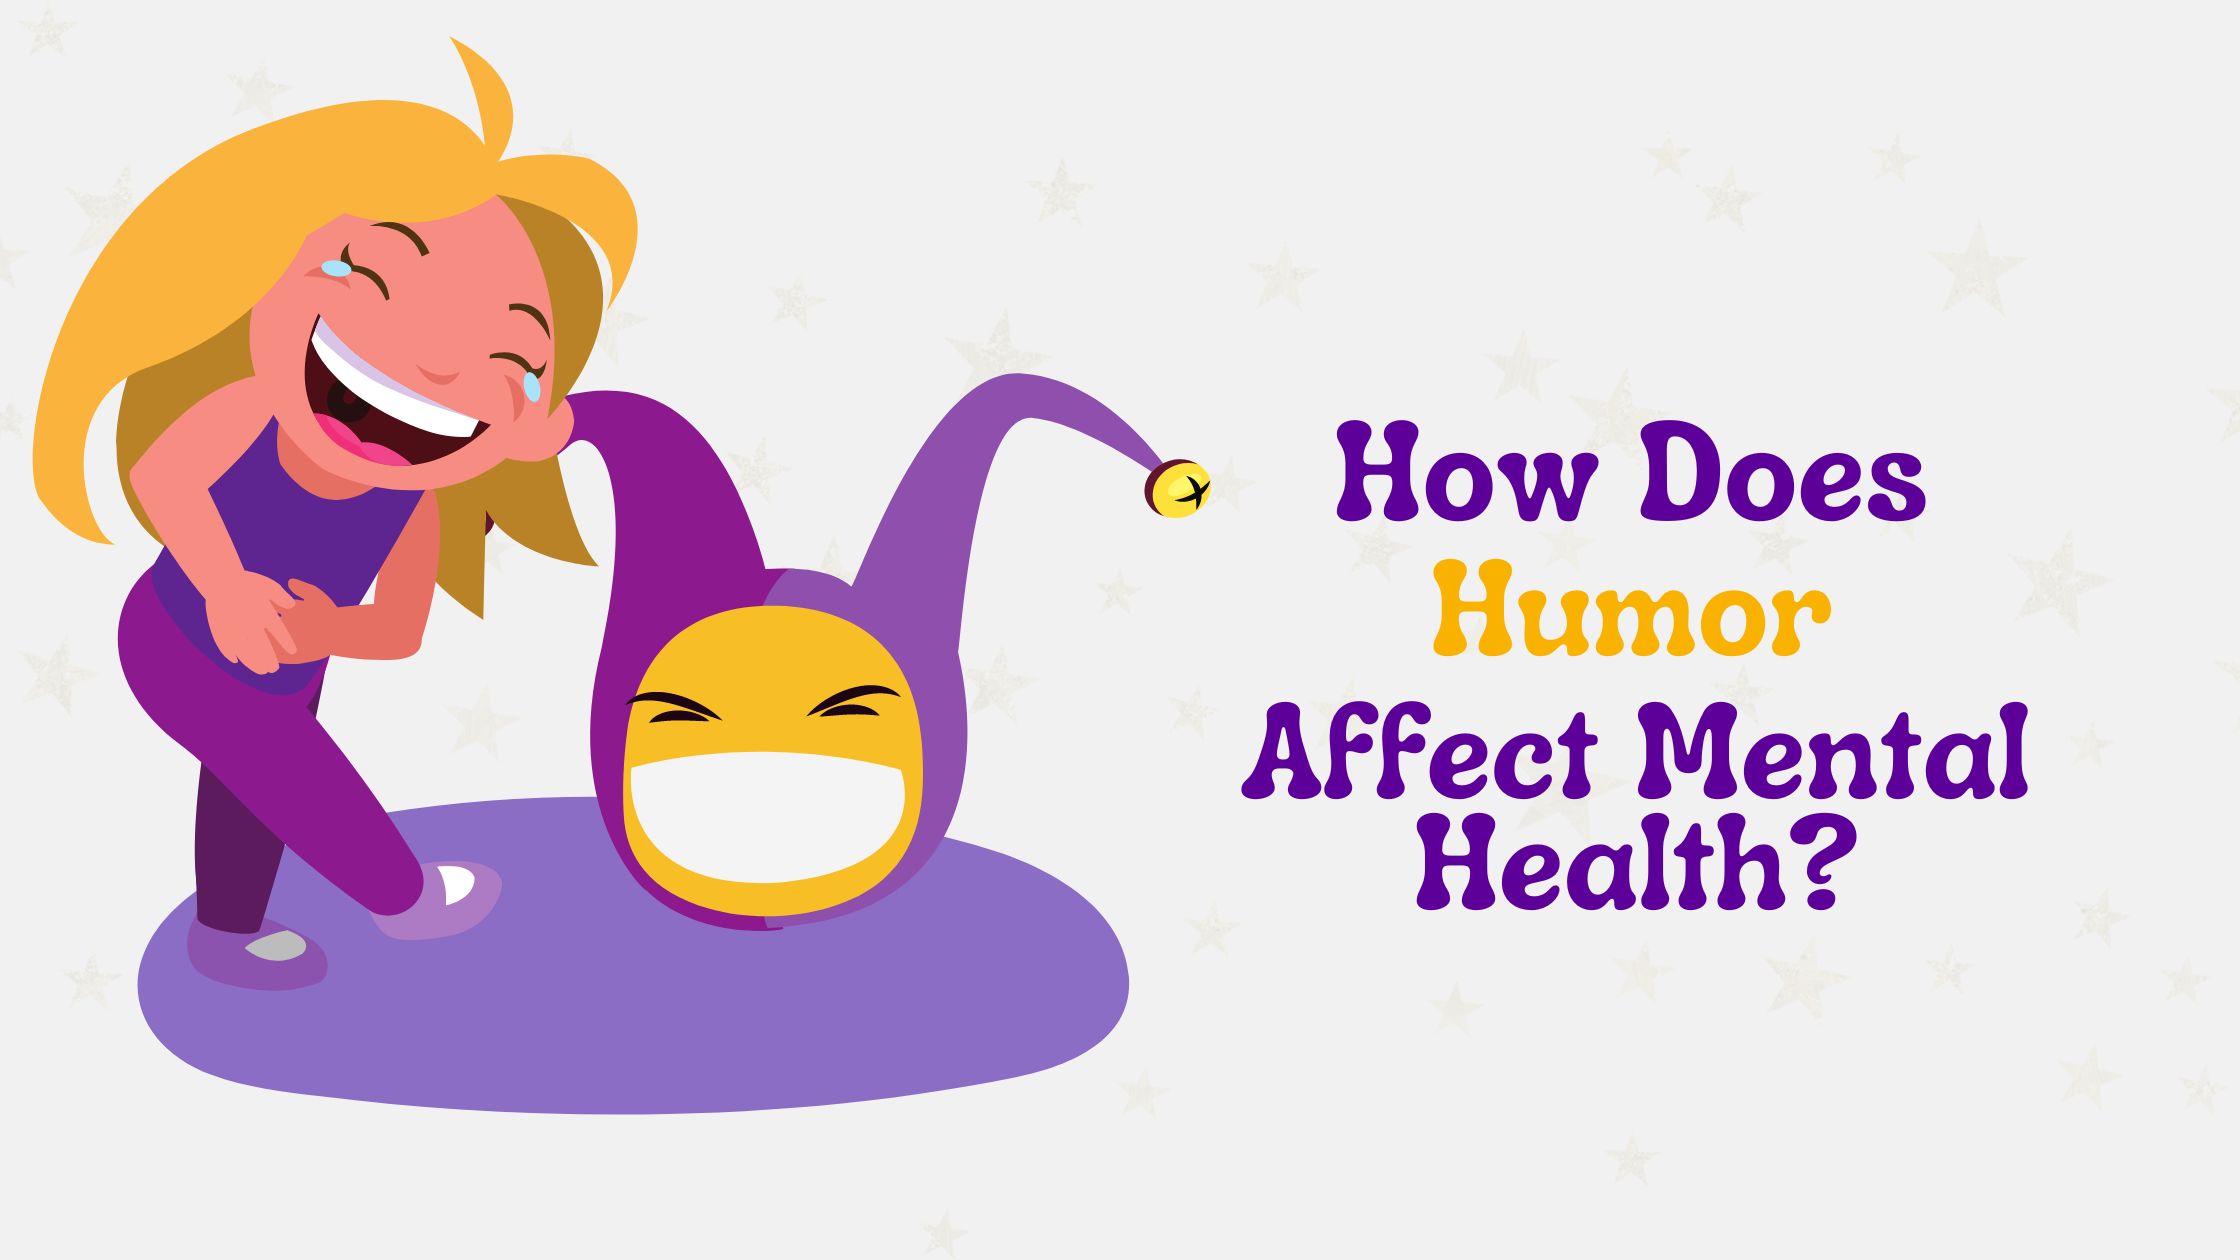 How Does Humor Affect Mental Health?